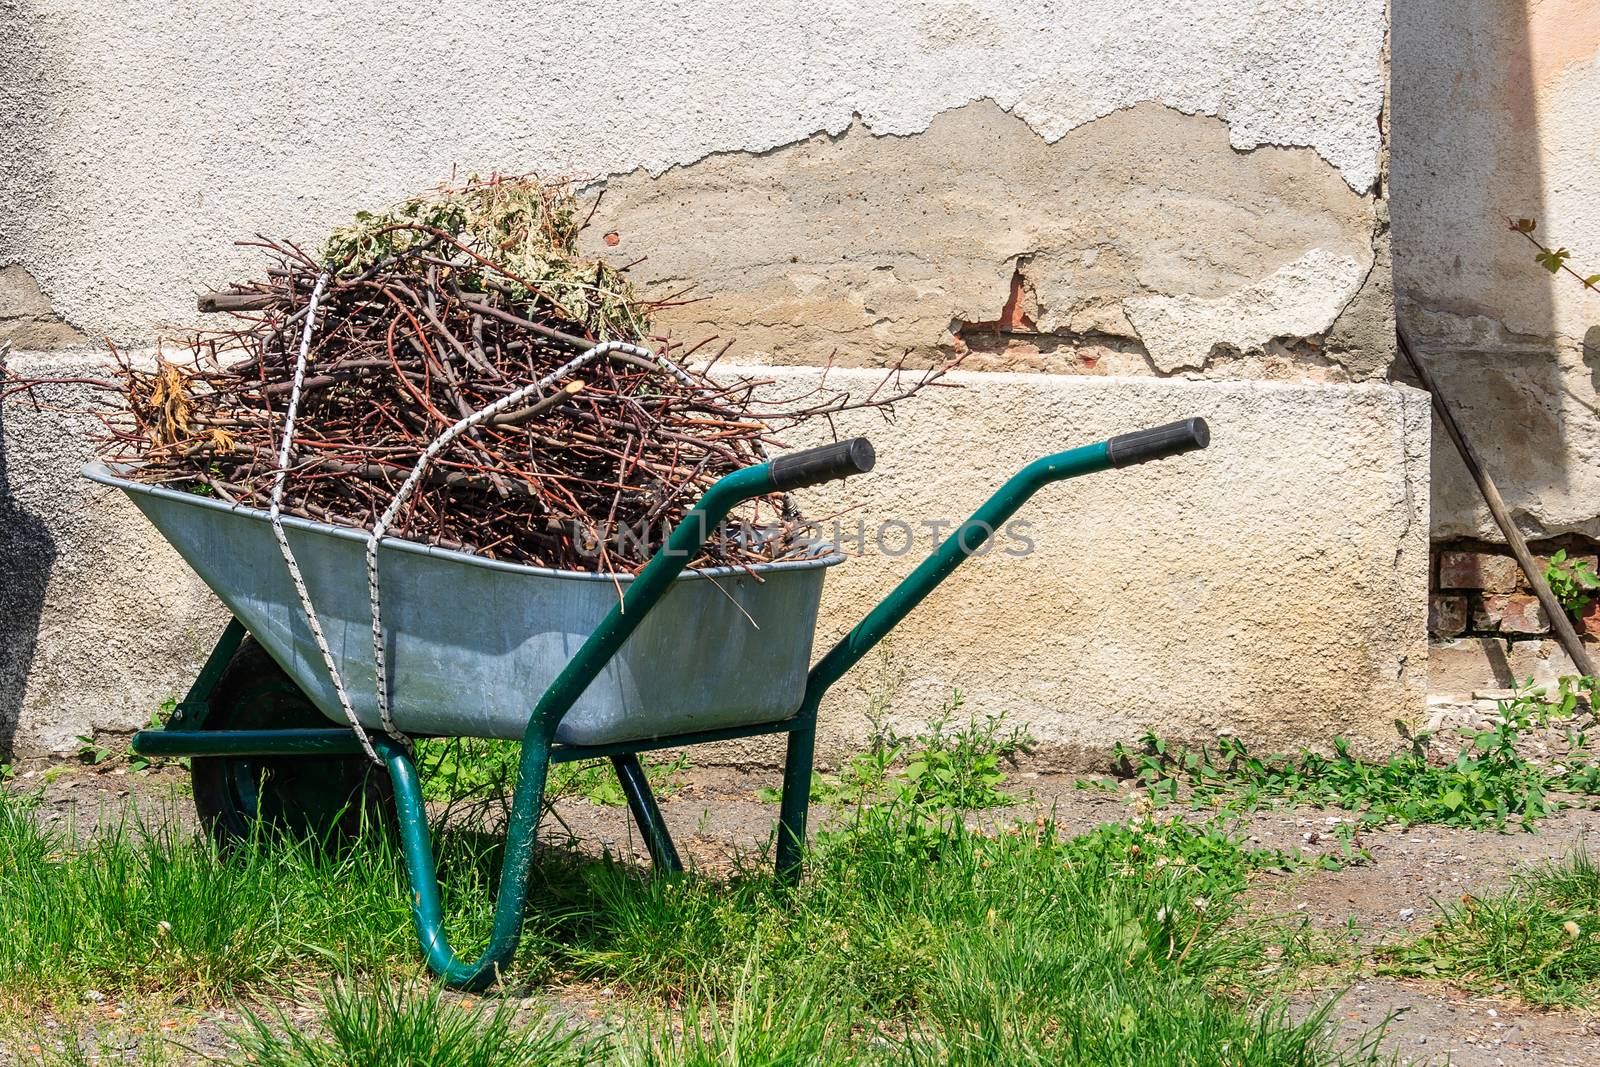 wheelbarrow filled with cut branches standing in the grass near the old wall